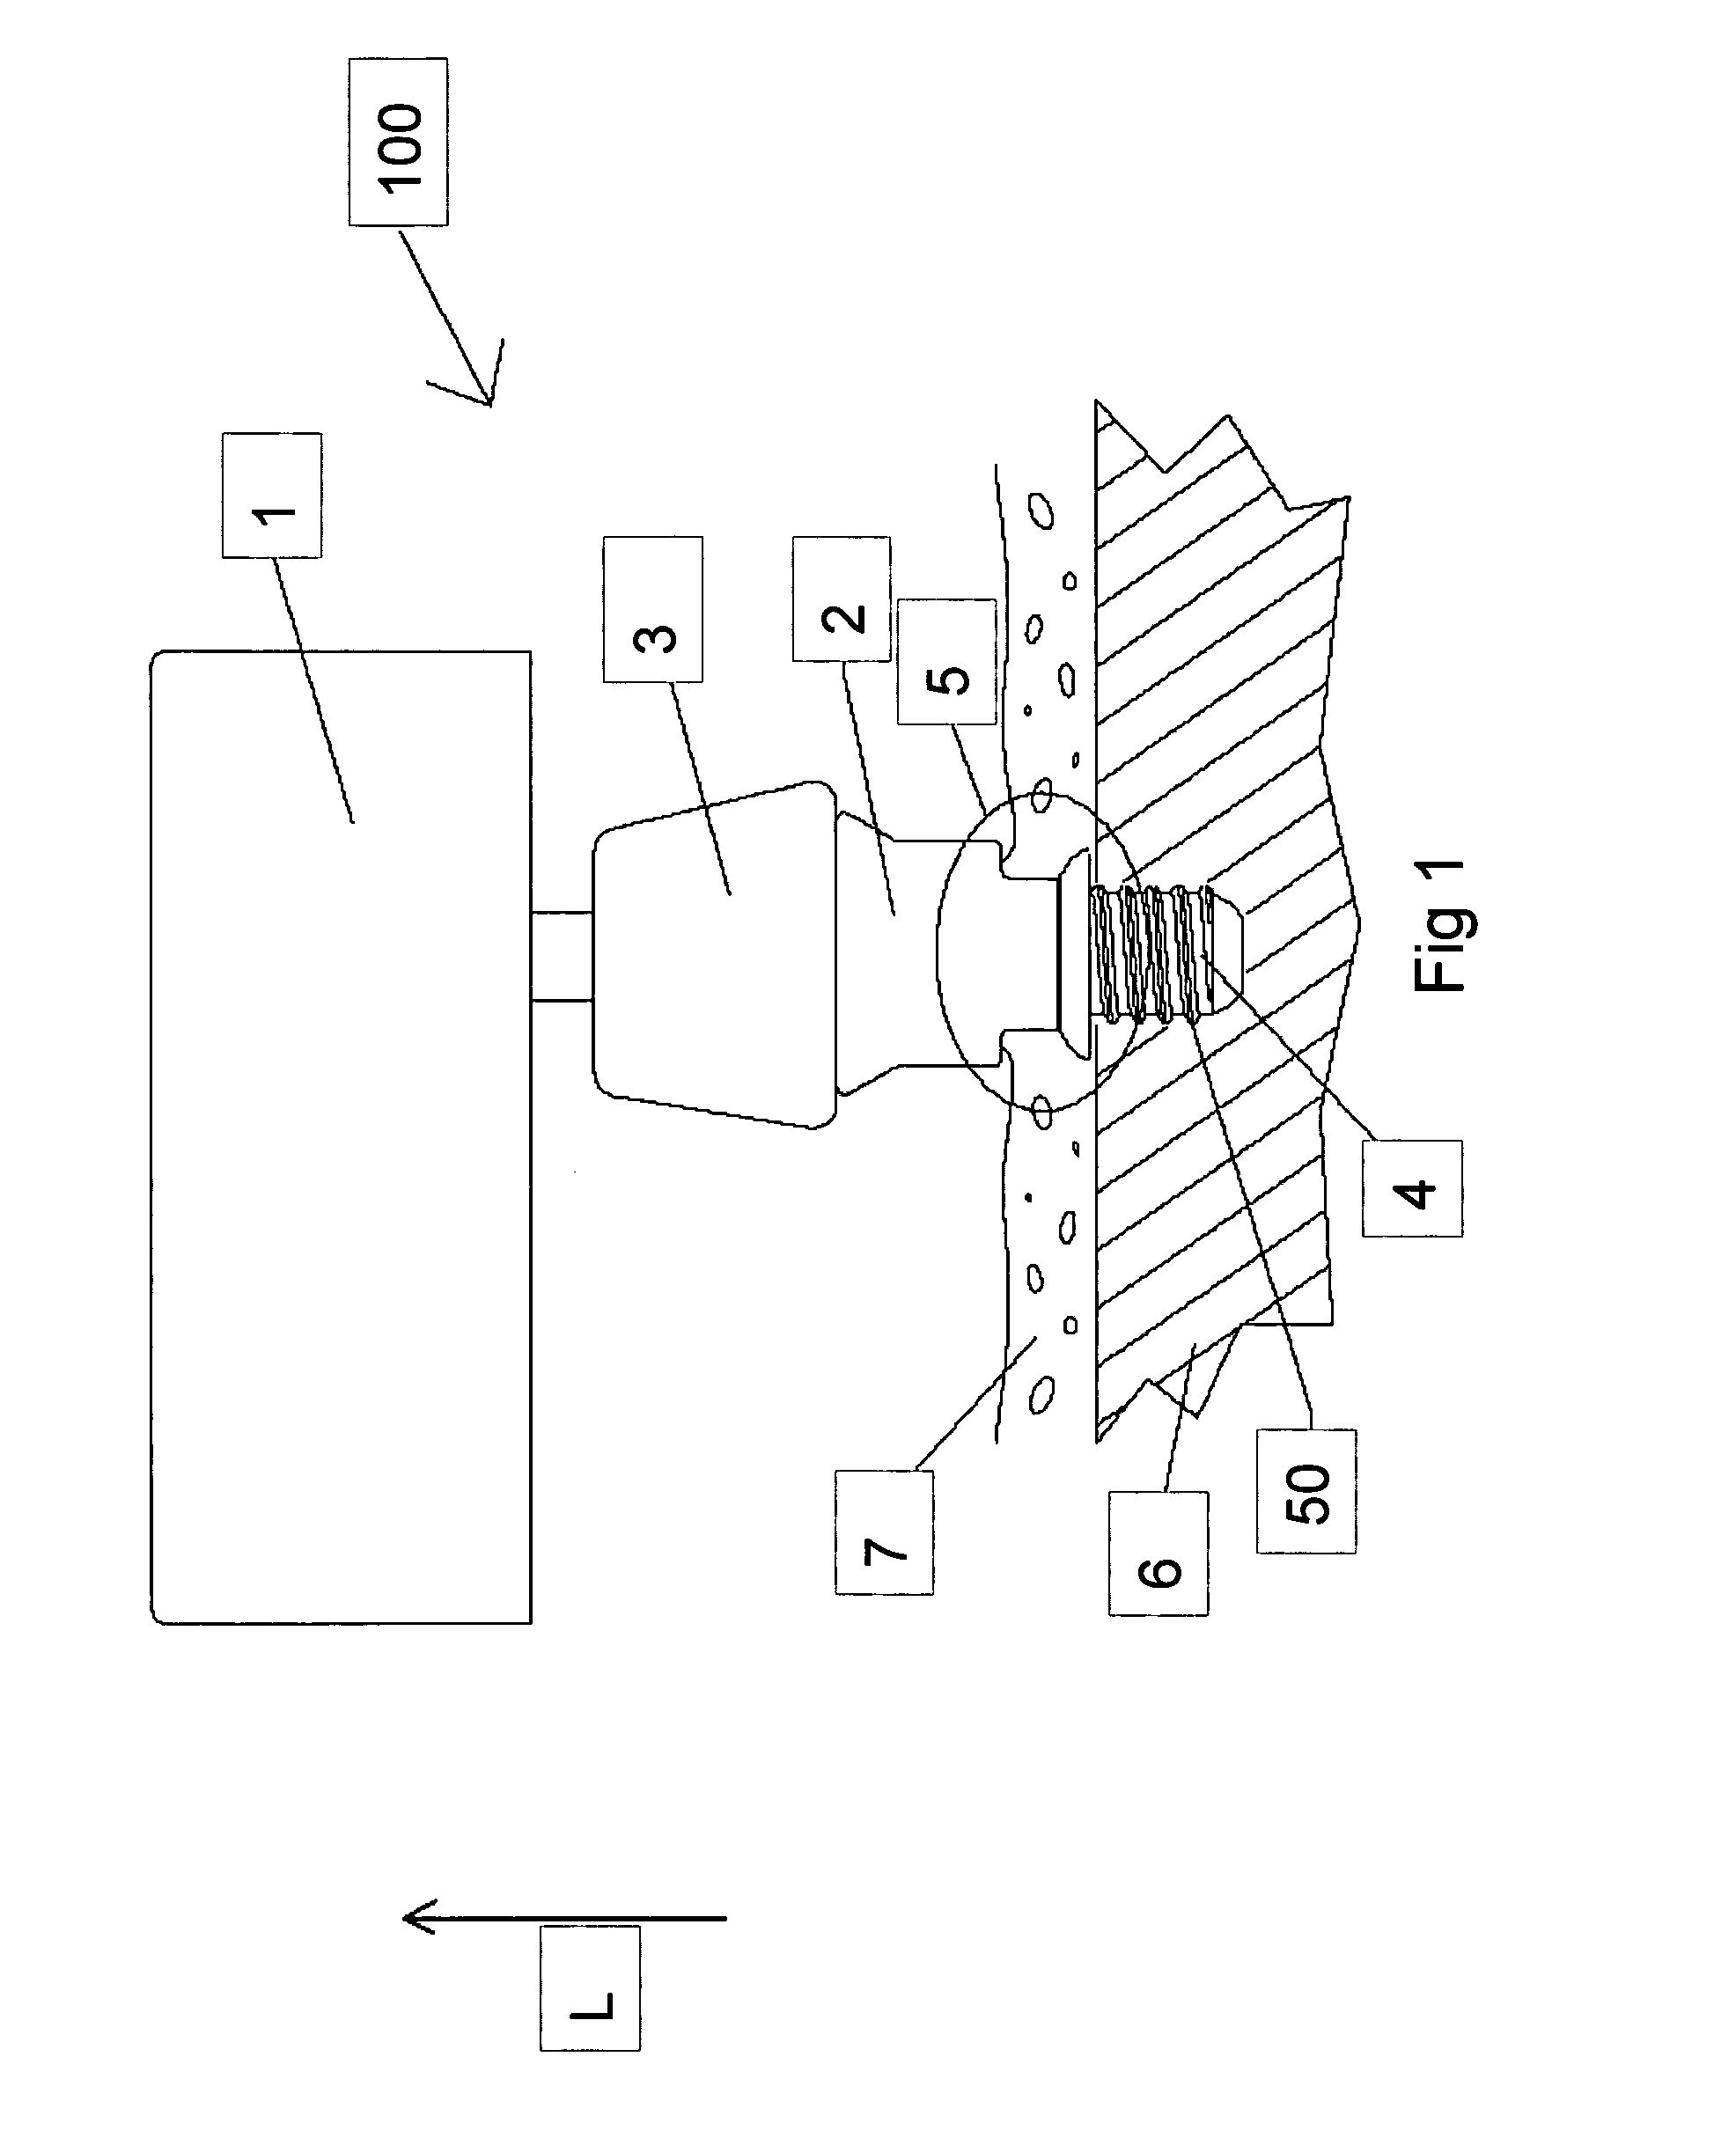 Hearing-aid interconnection system